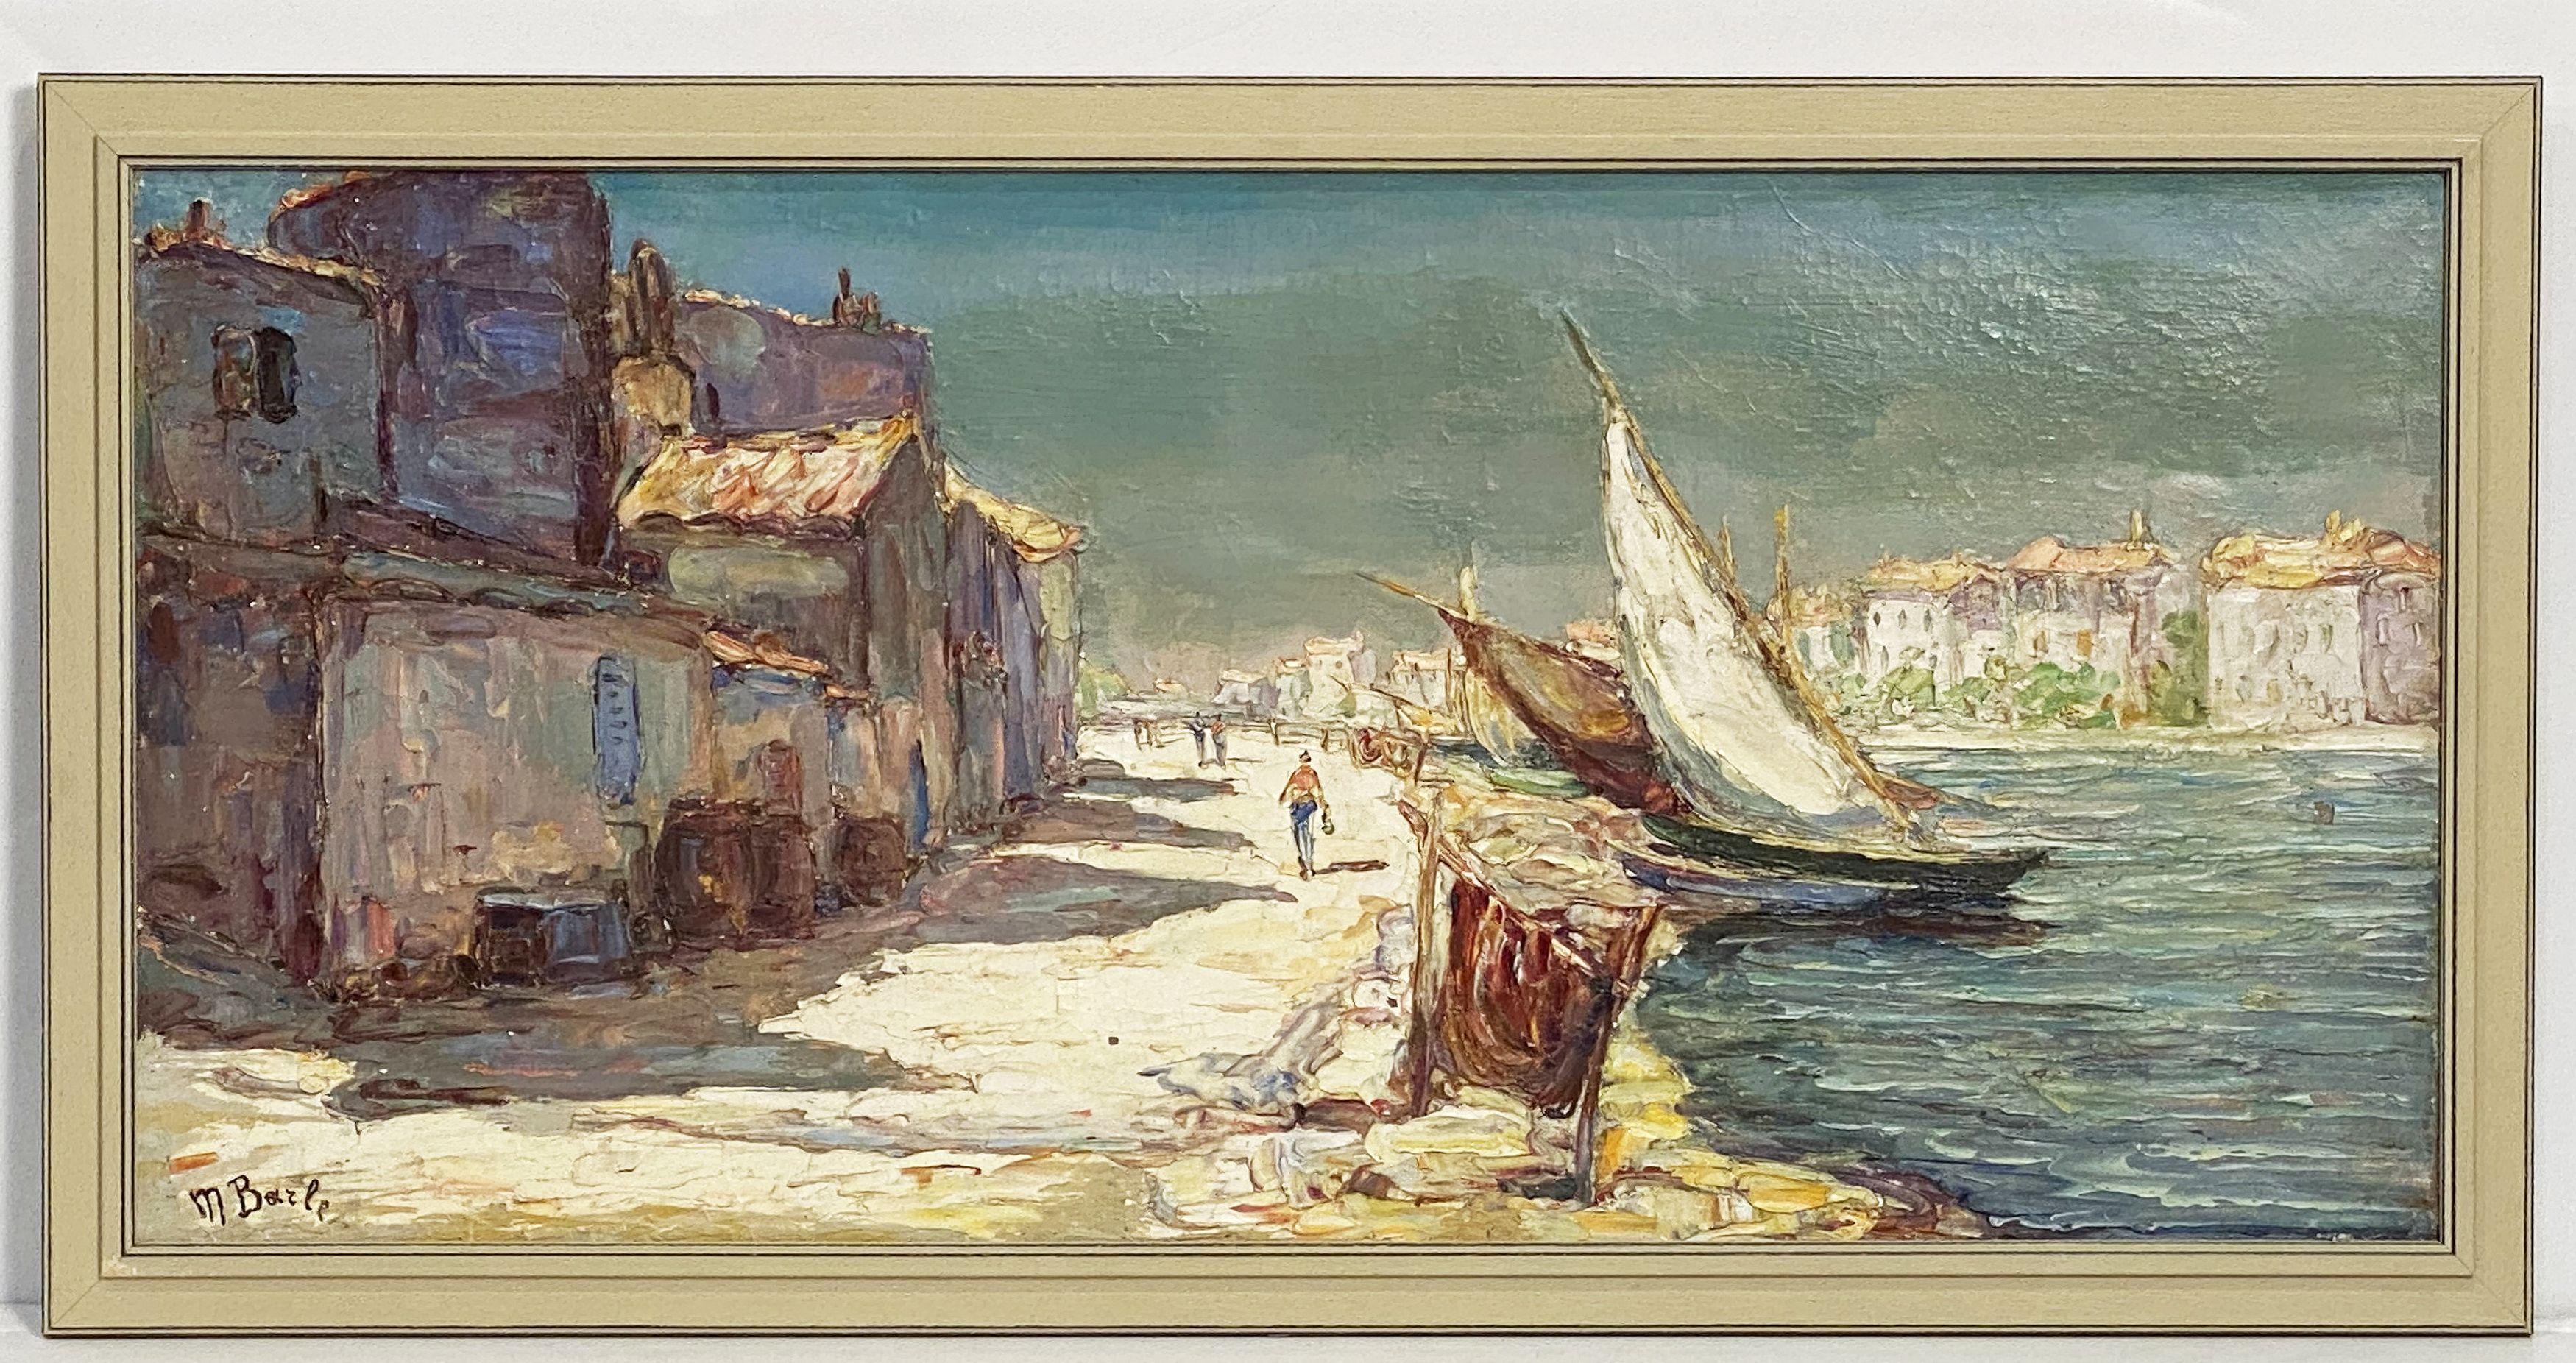 A fine French oil painting on canvas of a harbor scene, featuring a view of a sailboat and a picturesque town, signed M. Barle in bottom left facing corner, mounted in a rectangular painted wooden frame.

Maurice Barle (1903-1961) was a celebrated